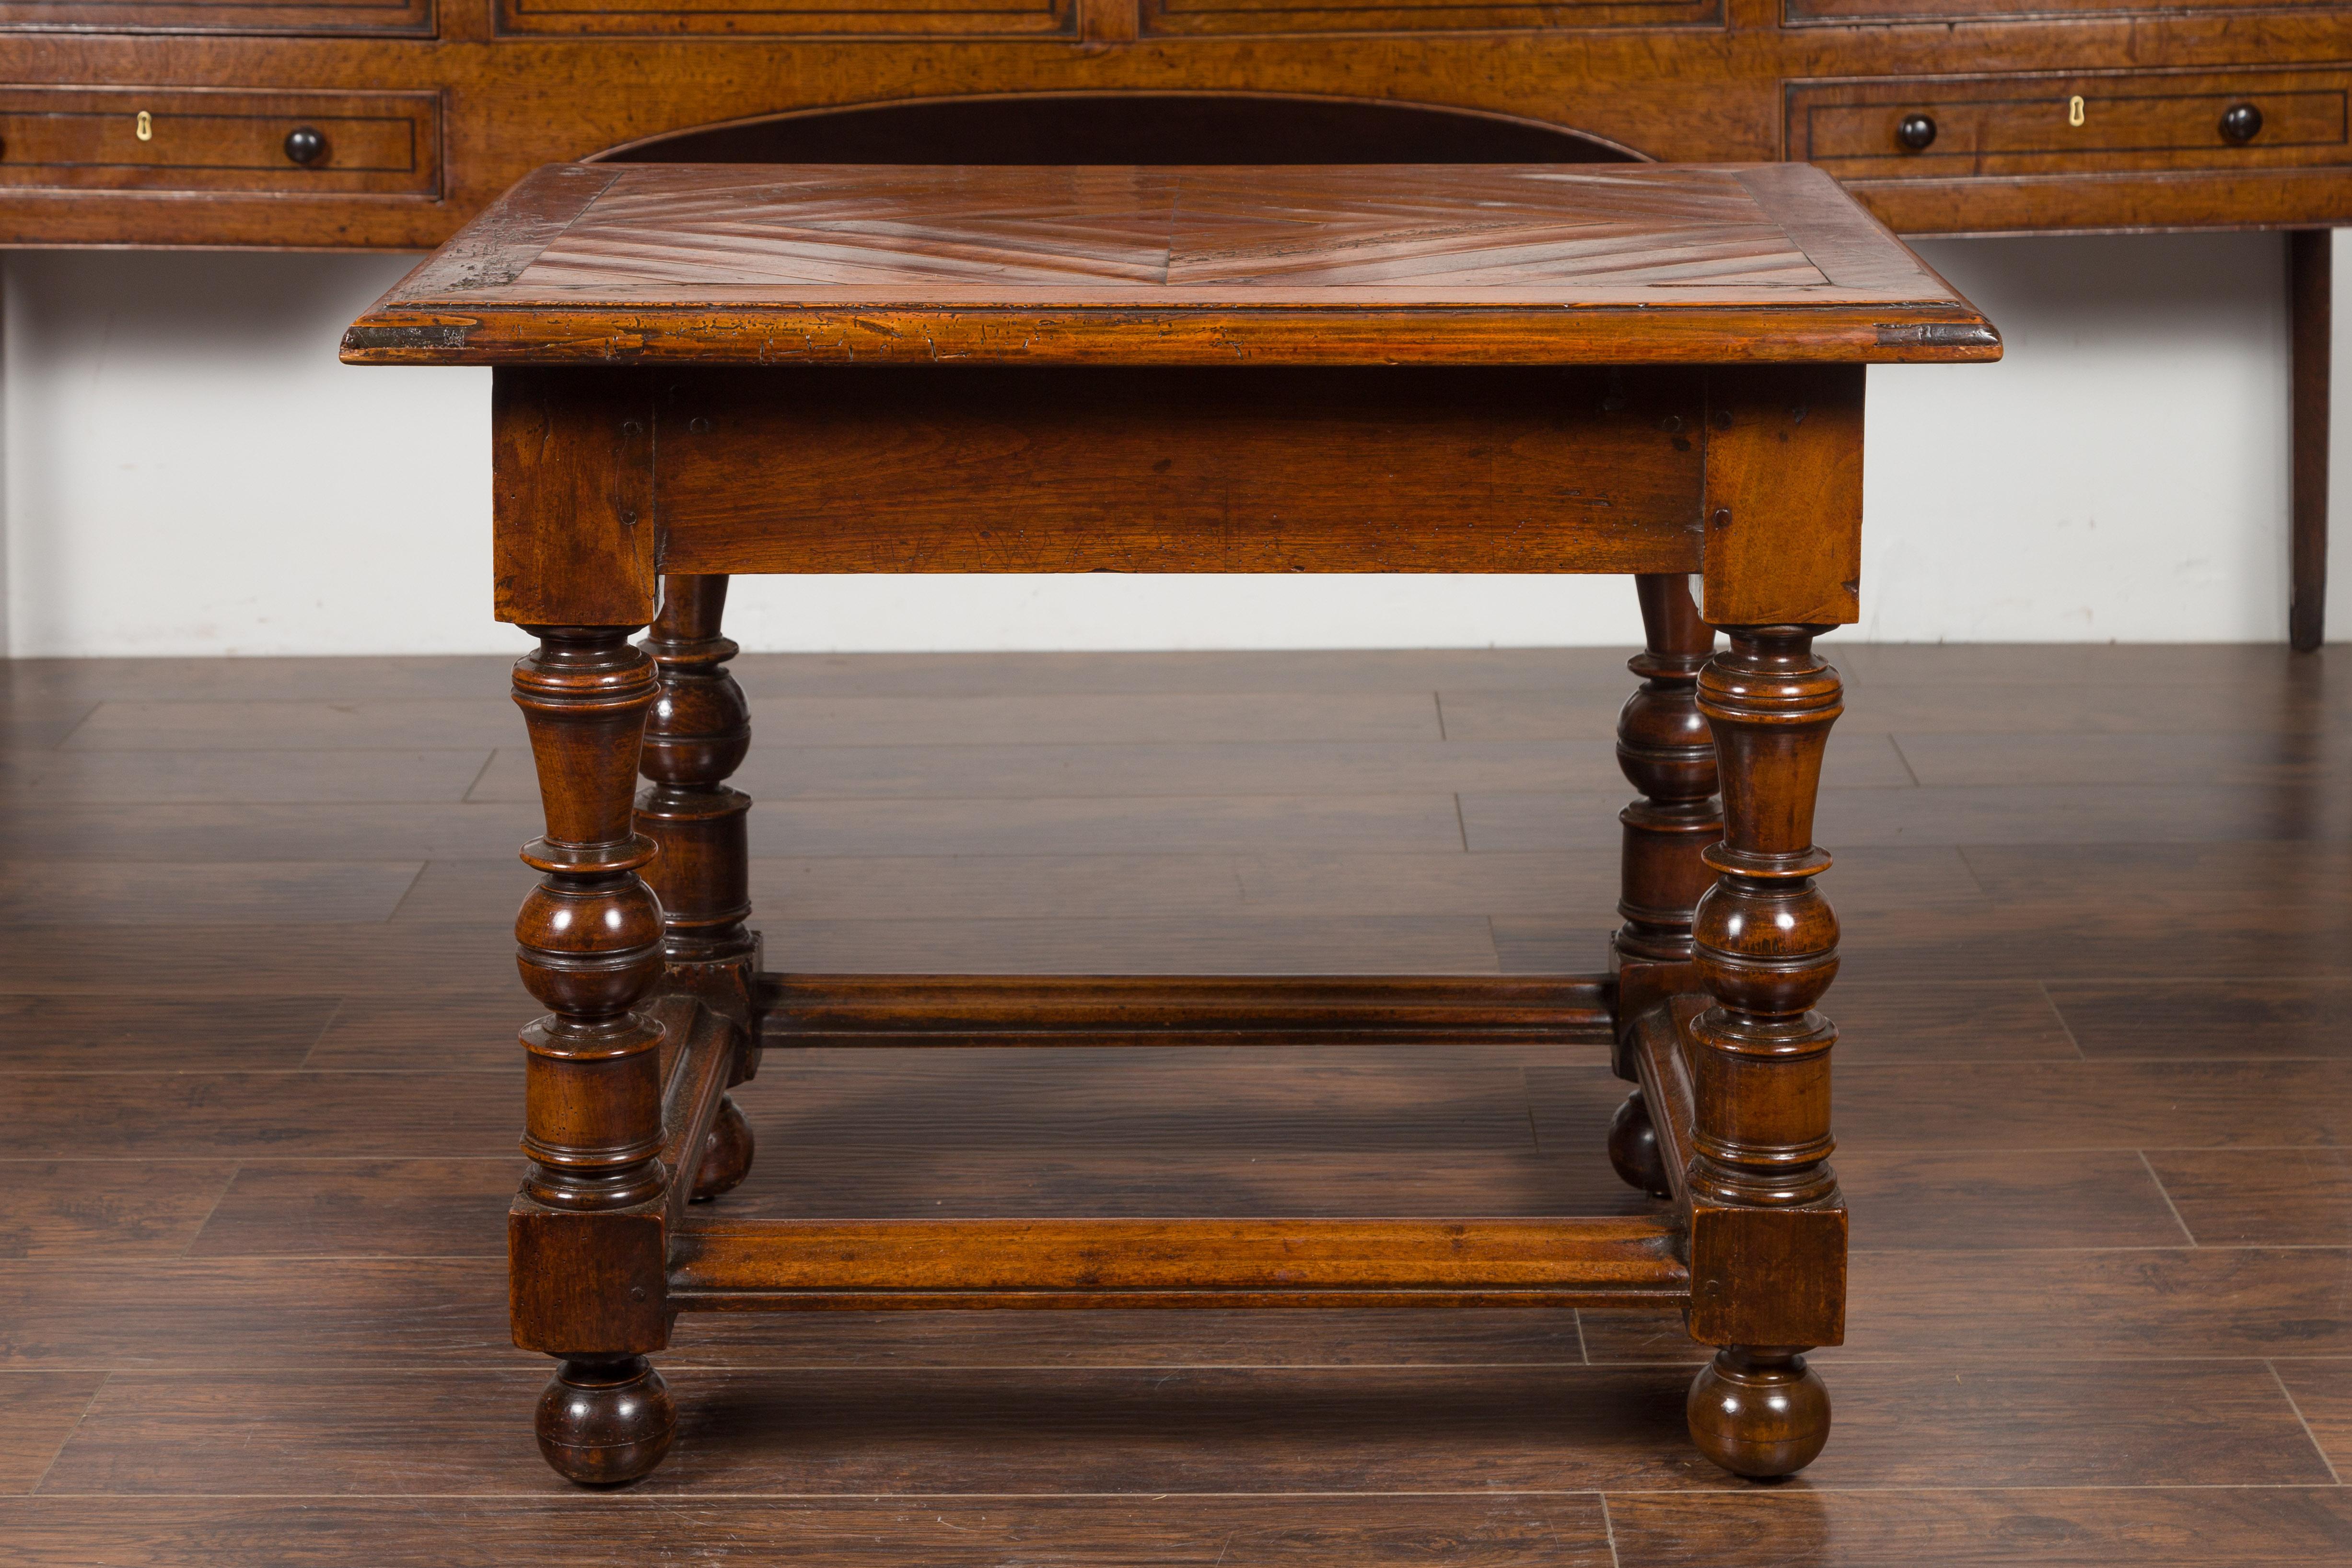 English 1850s Walnut Parquet Top Table with Single Drawer and Turned Legs For Sale 7